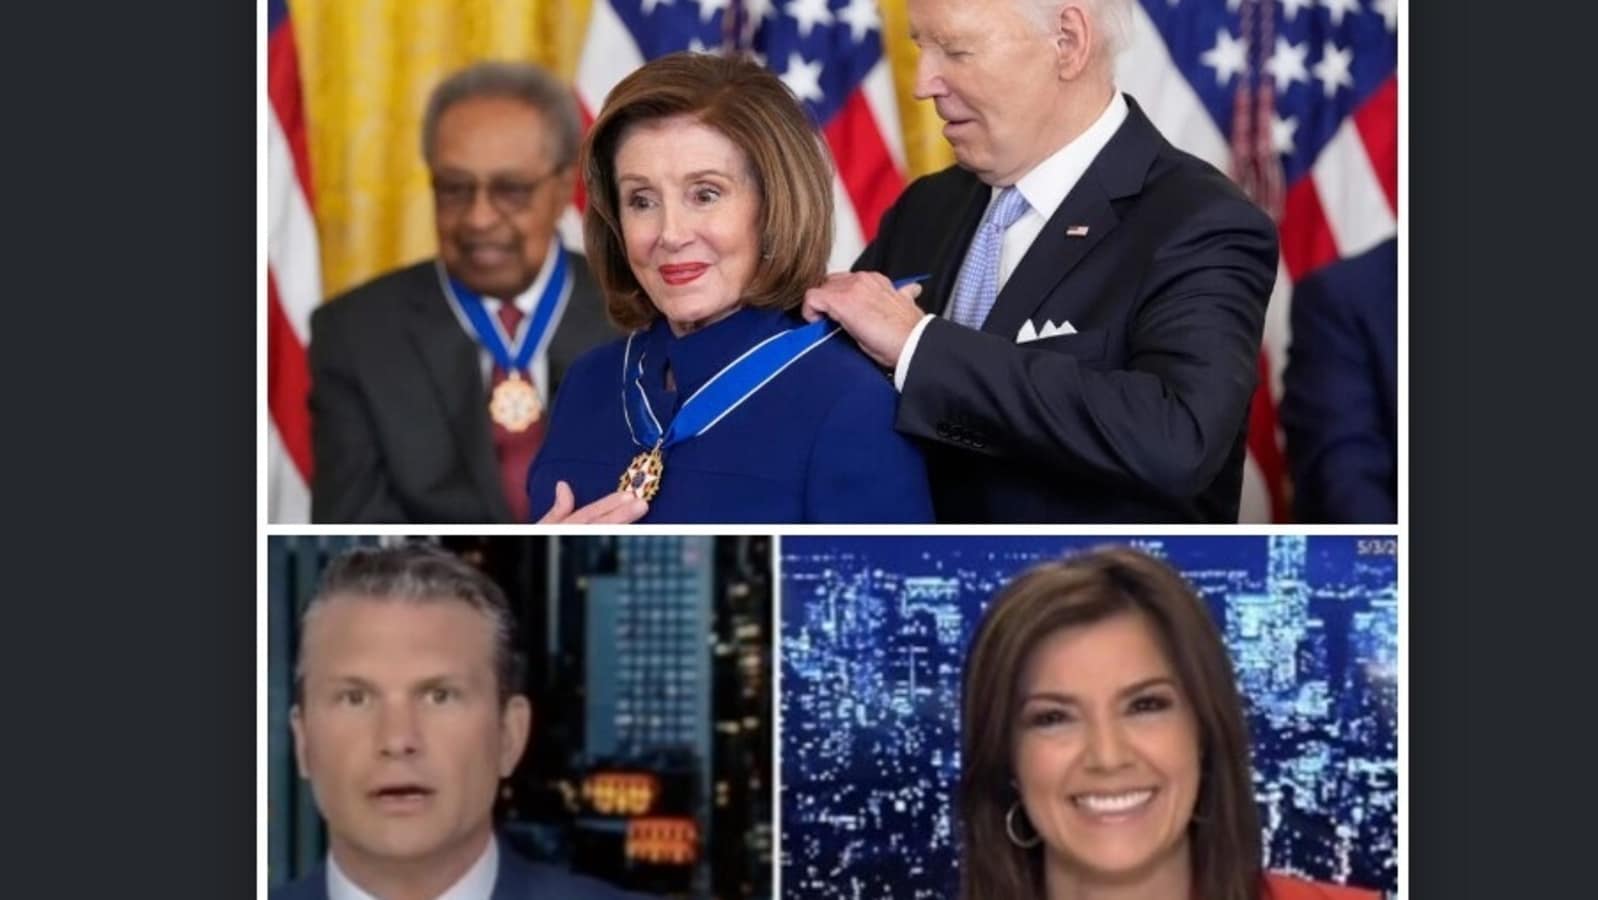 Rachel Campos-Duffy mocks Nancy Pelosi's husband after she gets Presidential Medal of Freedom: ‘Maybe Paul needs hammer'